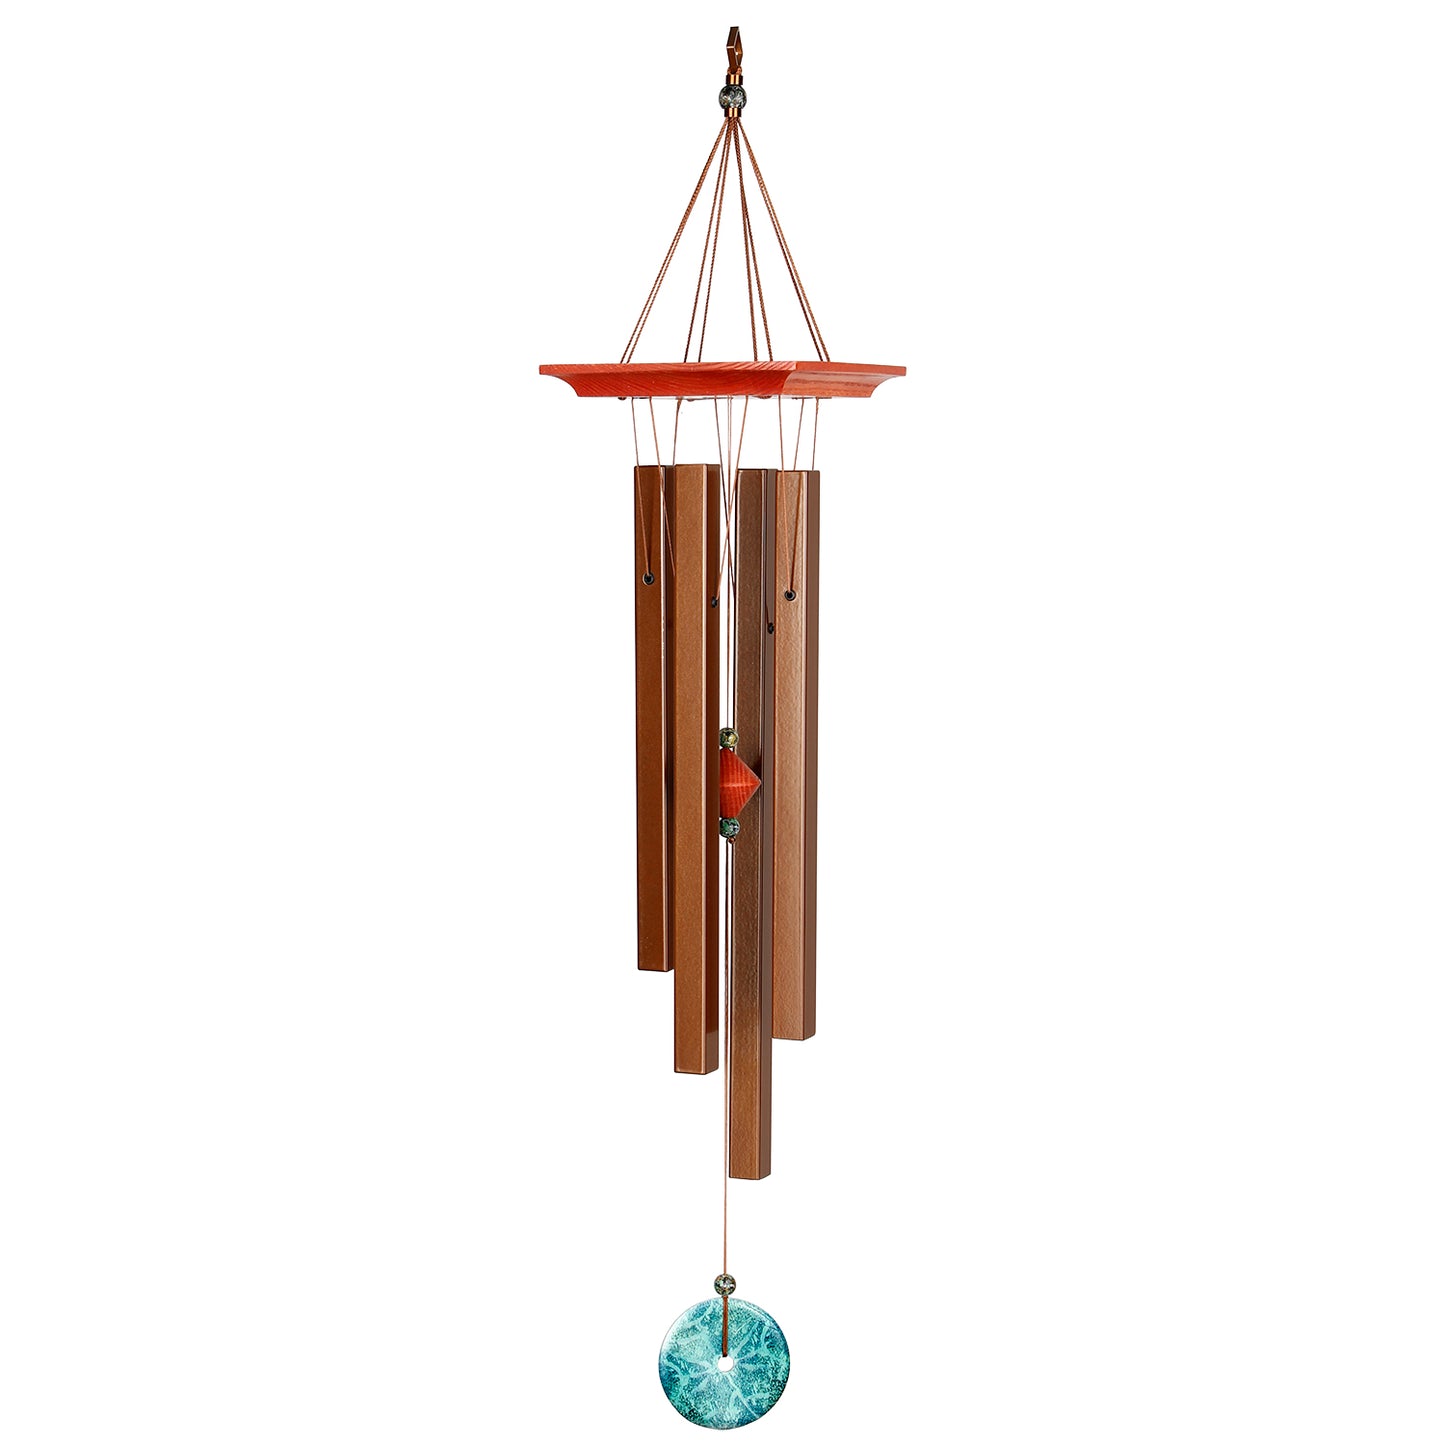 Turquoise Chime - Medium - by Woodstock Chimes